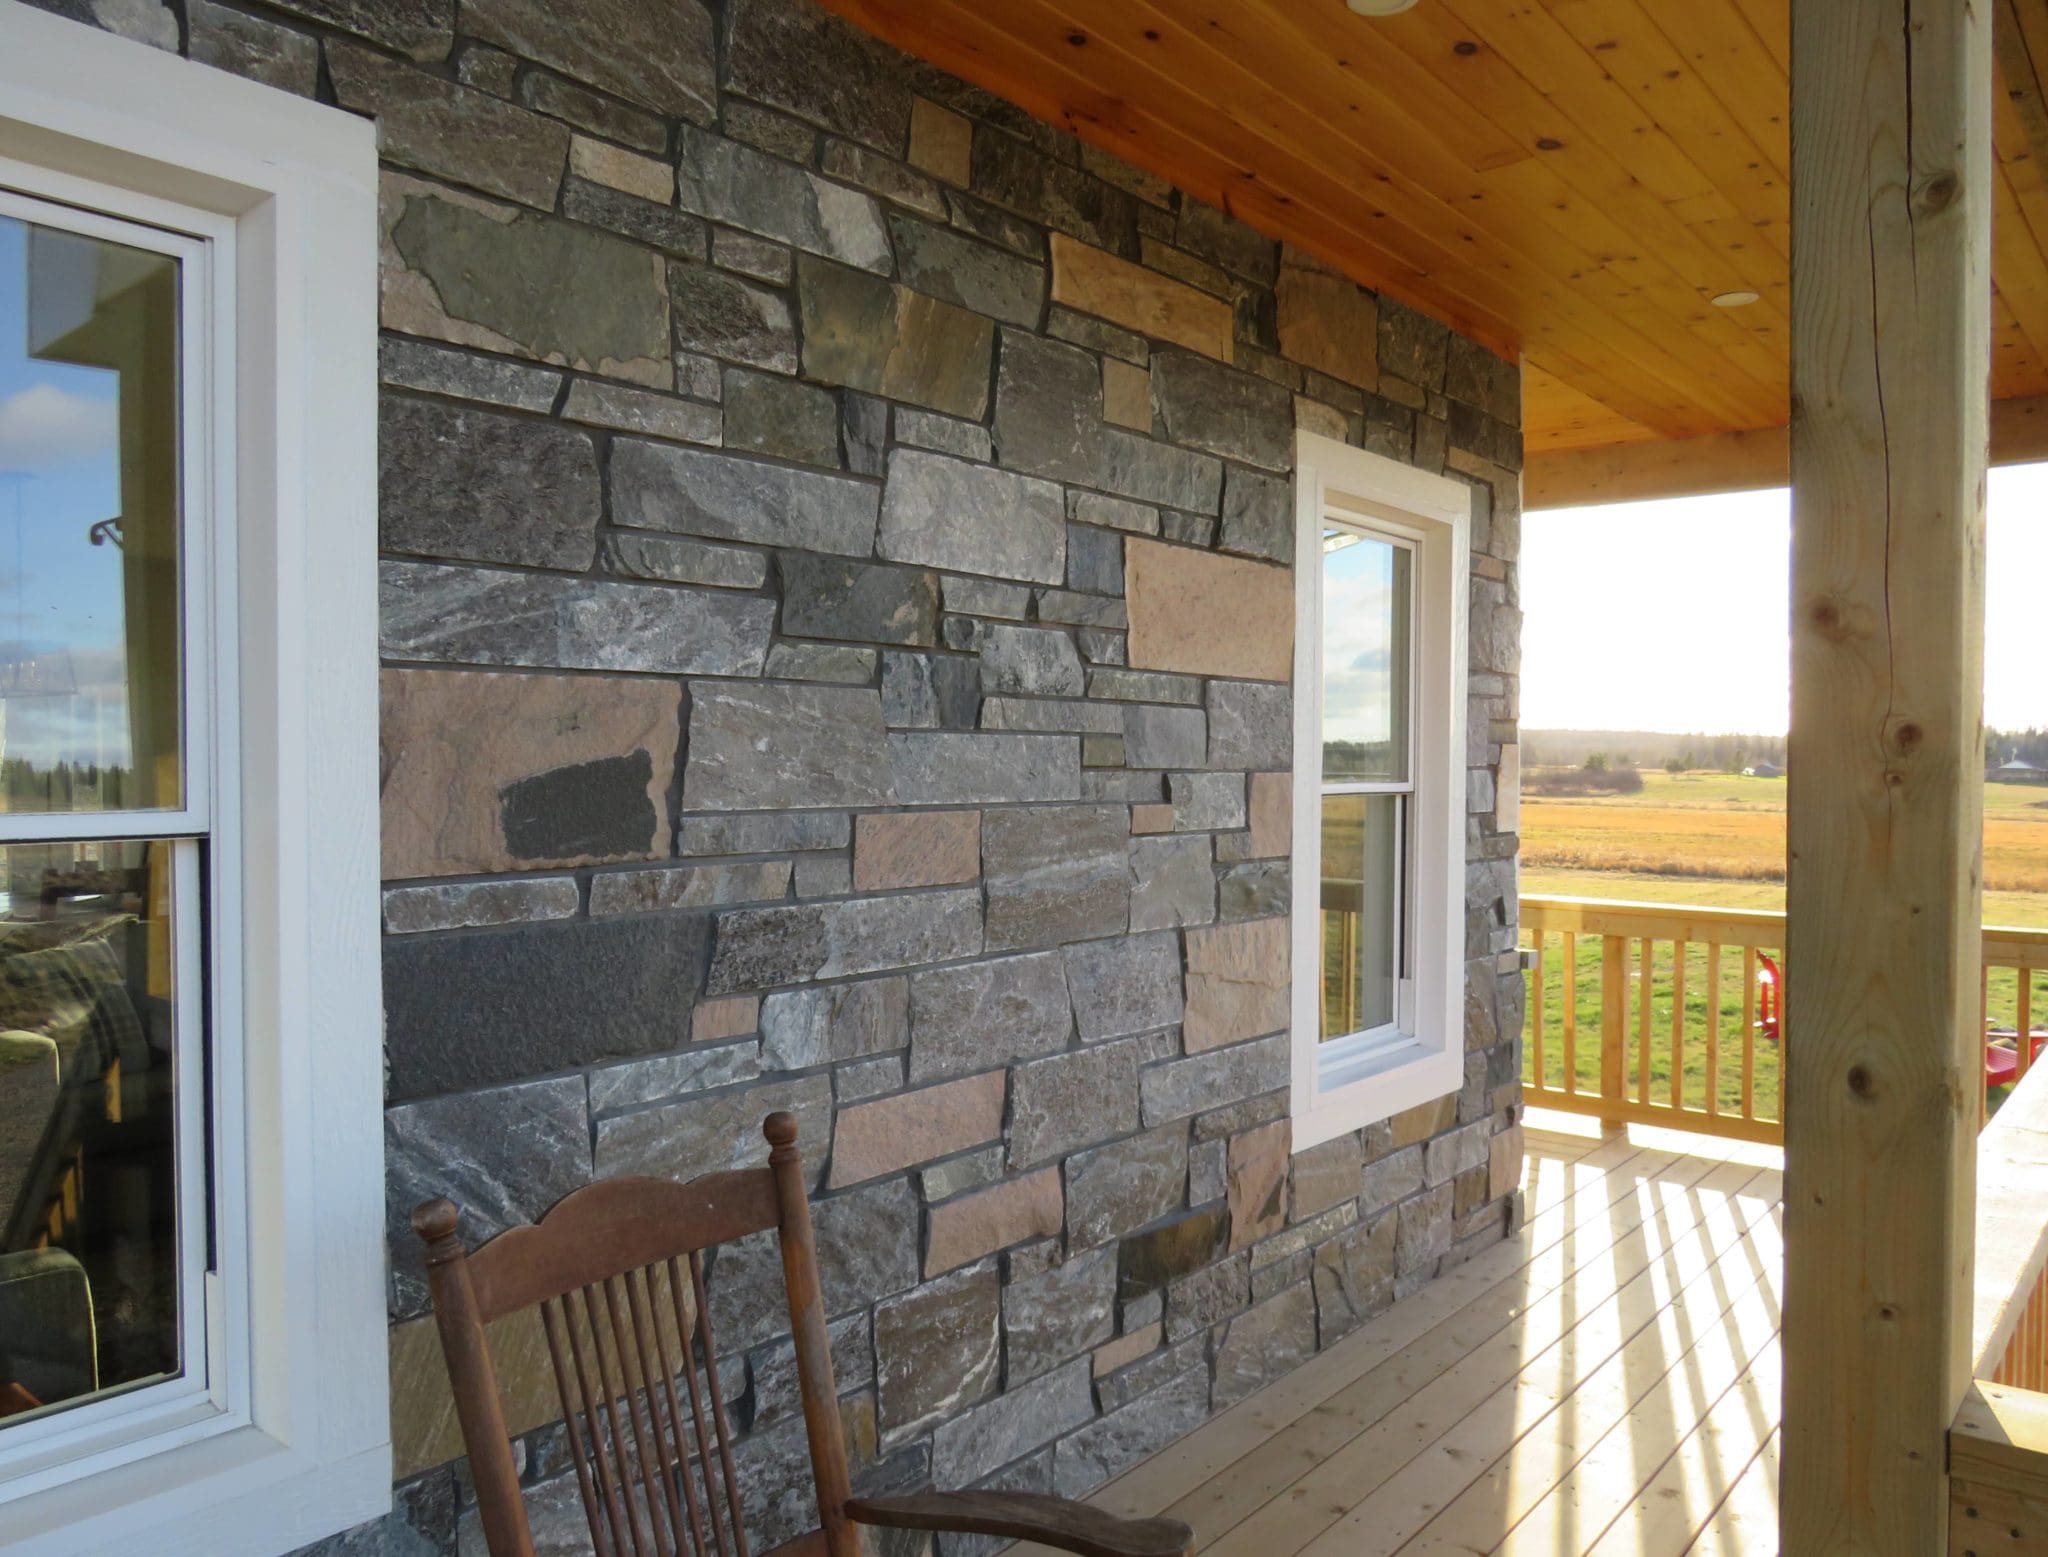 Pembroke Real Thin Stone Veneer with Custom Tans Wrap Around Porch